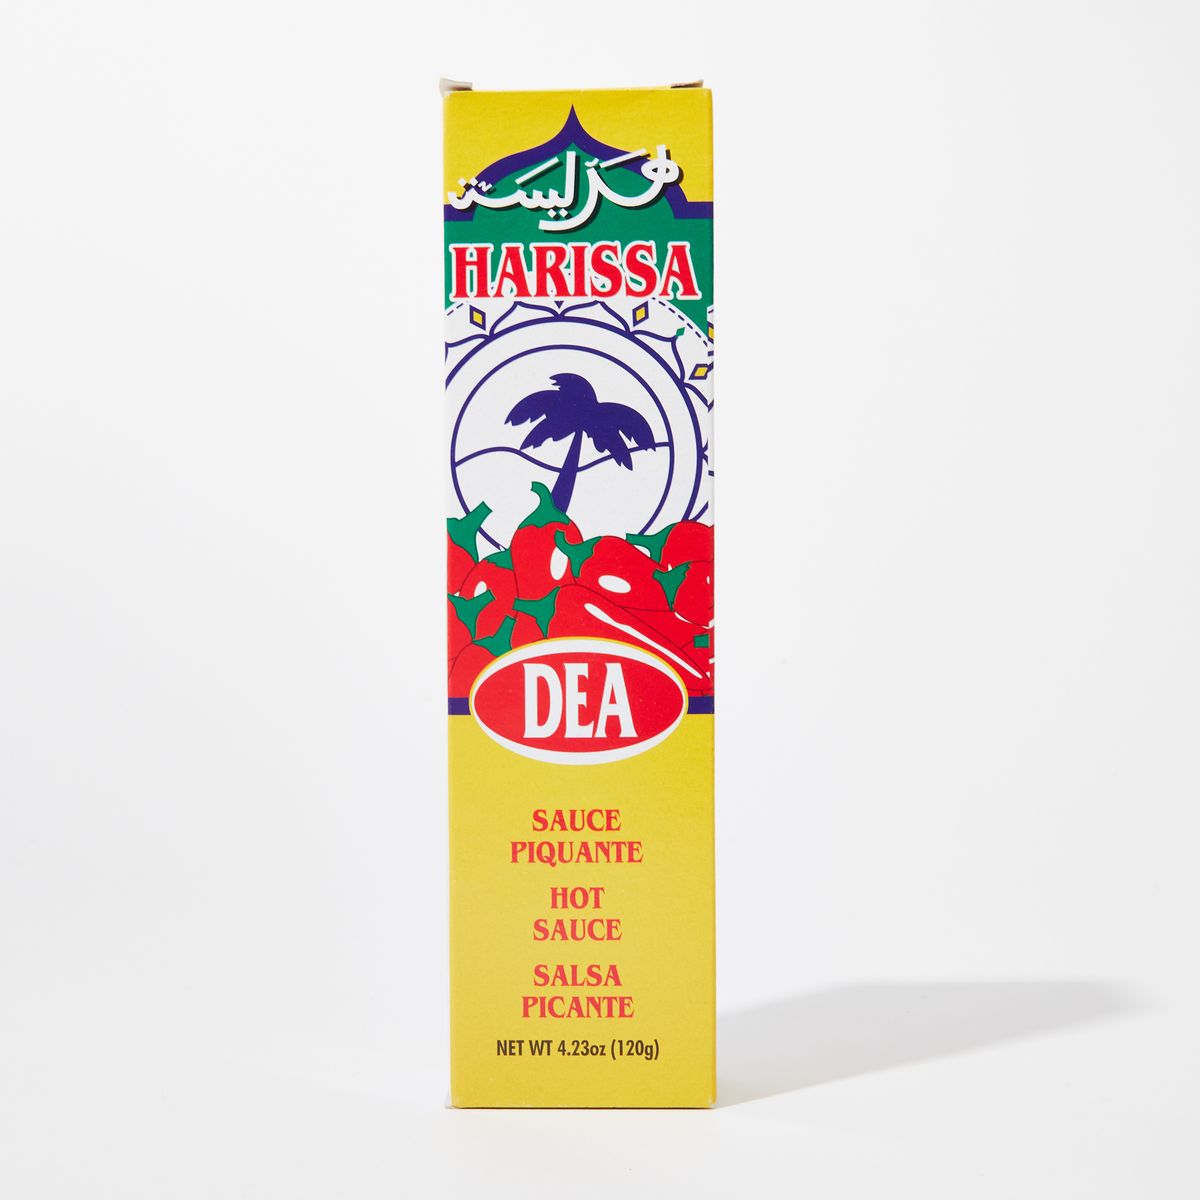 Yellow box with graphics of peppers and a palm tree that reads "Harissa" "Hot Sauce"